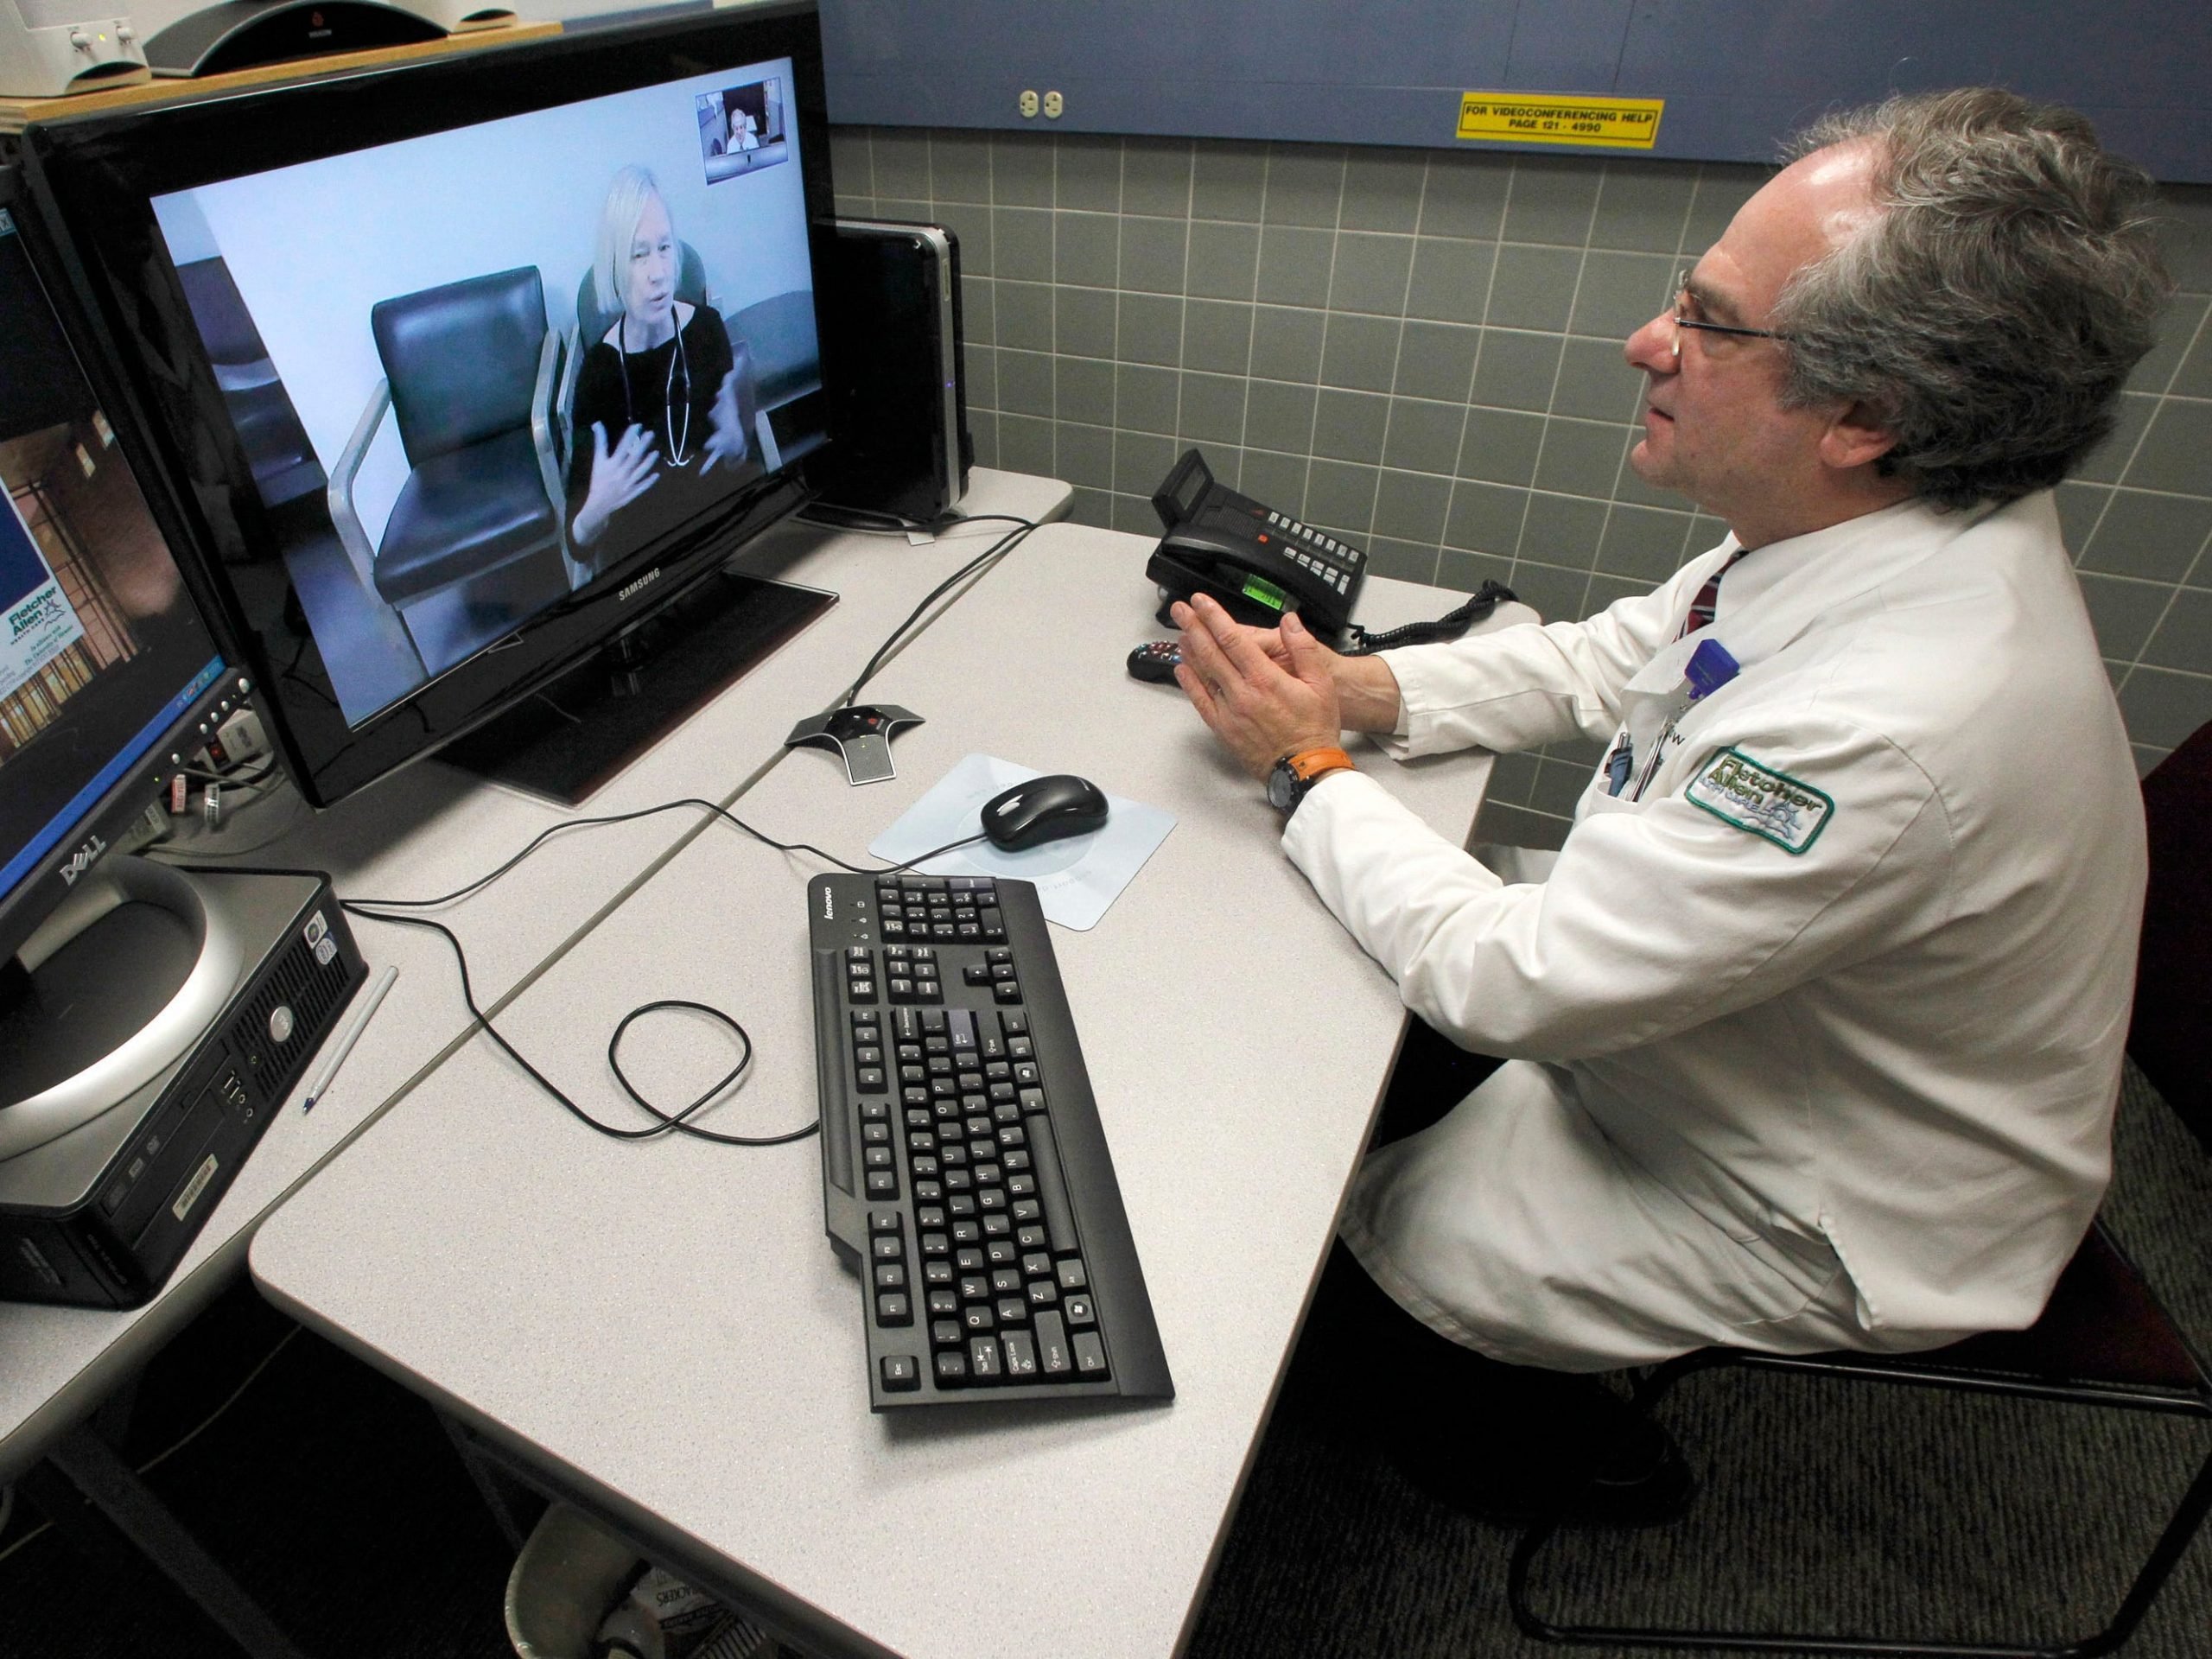 A doctor wearing a white lab coat sits at a desk in front of a monitor with a woman speaking on the screen.